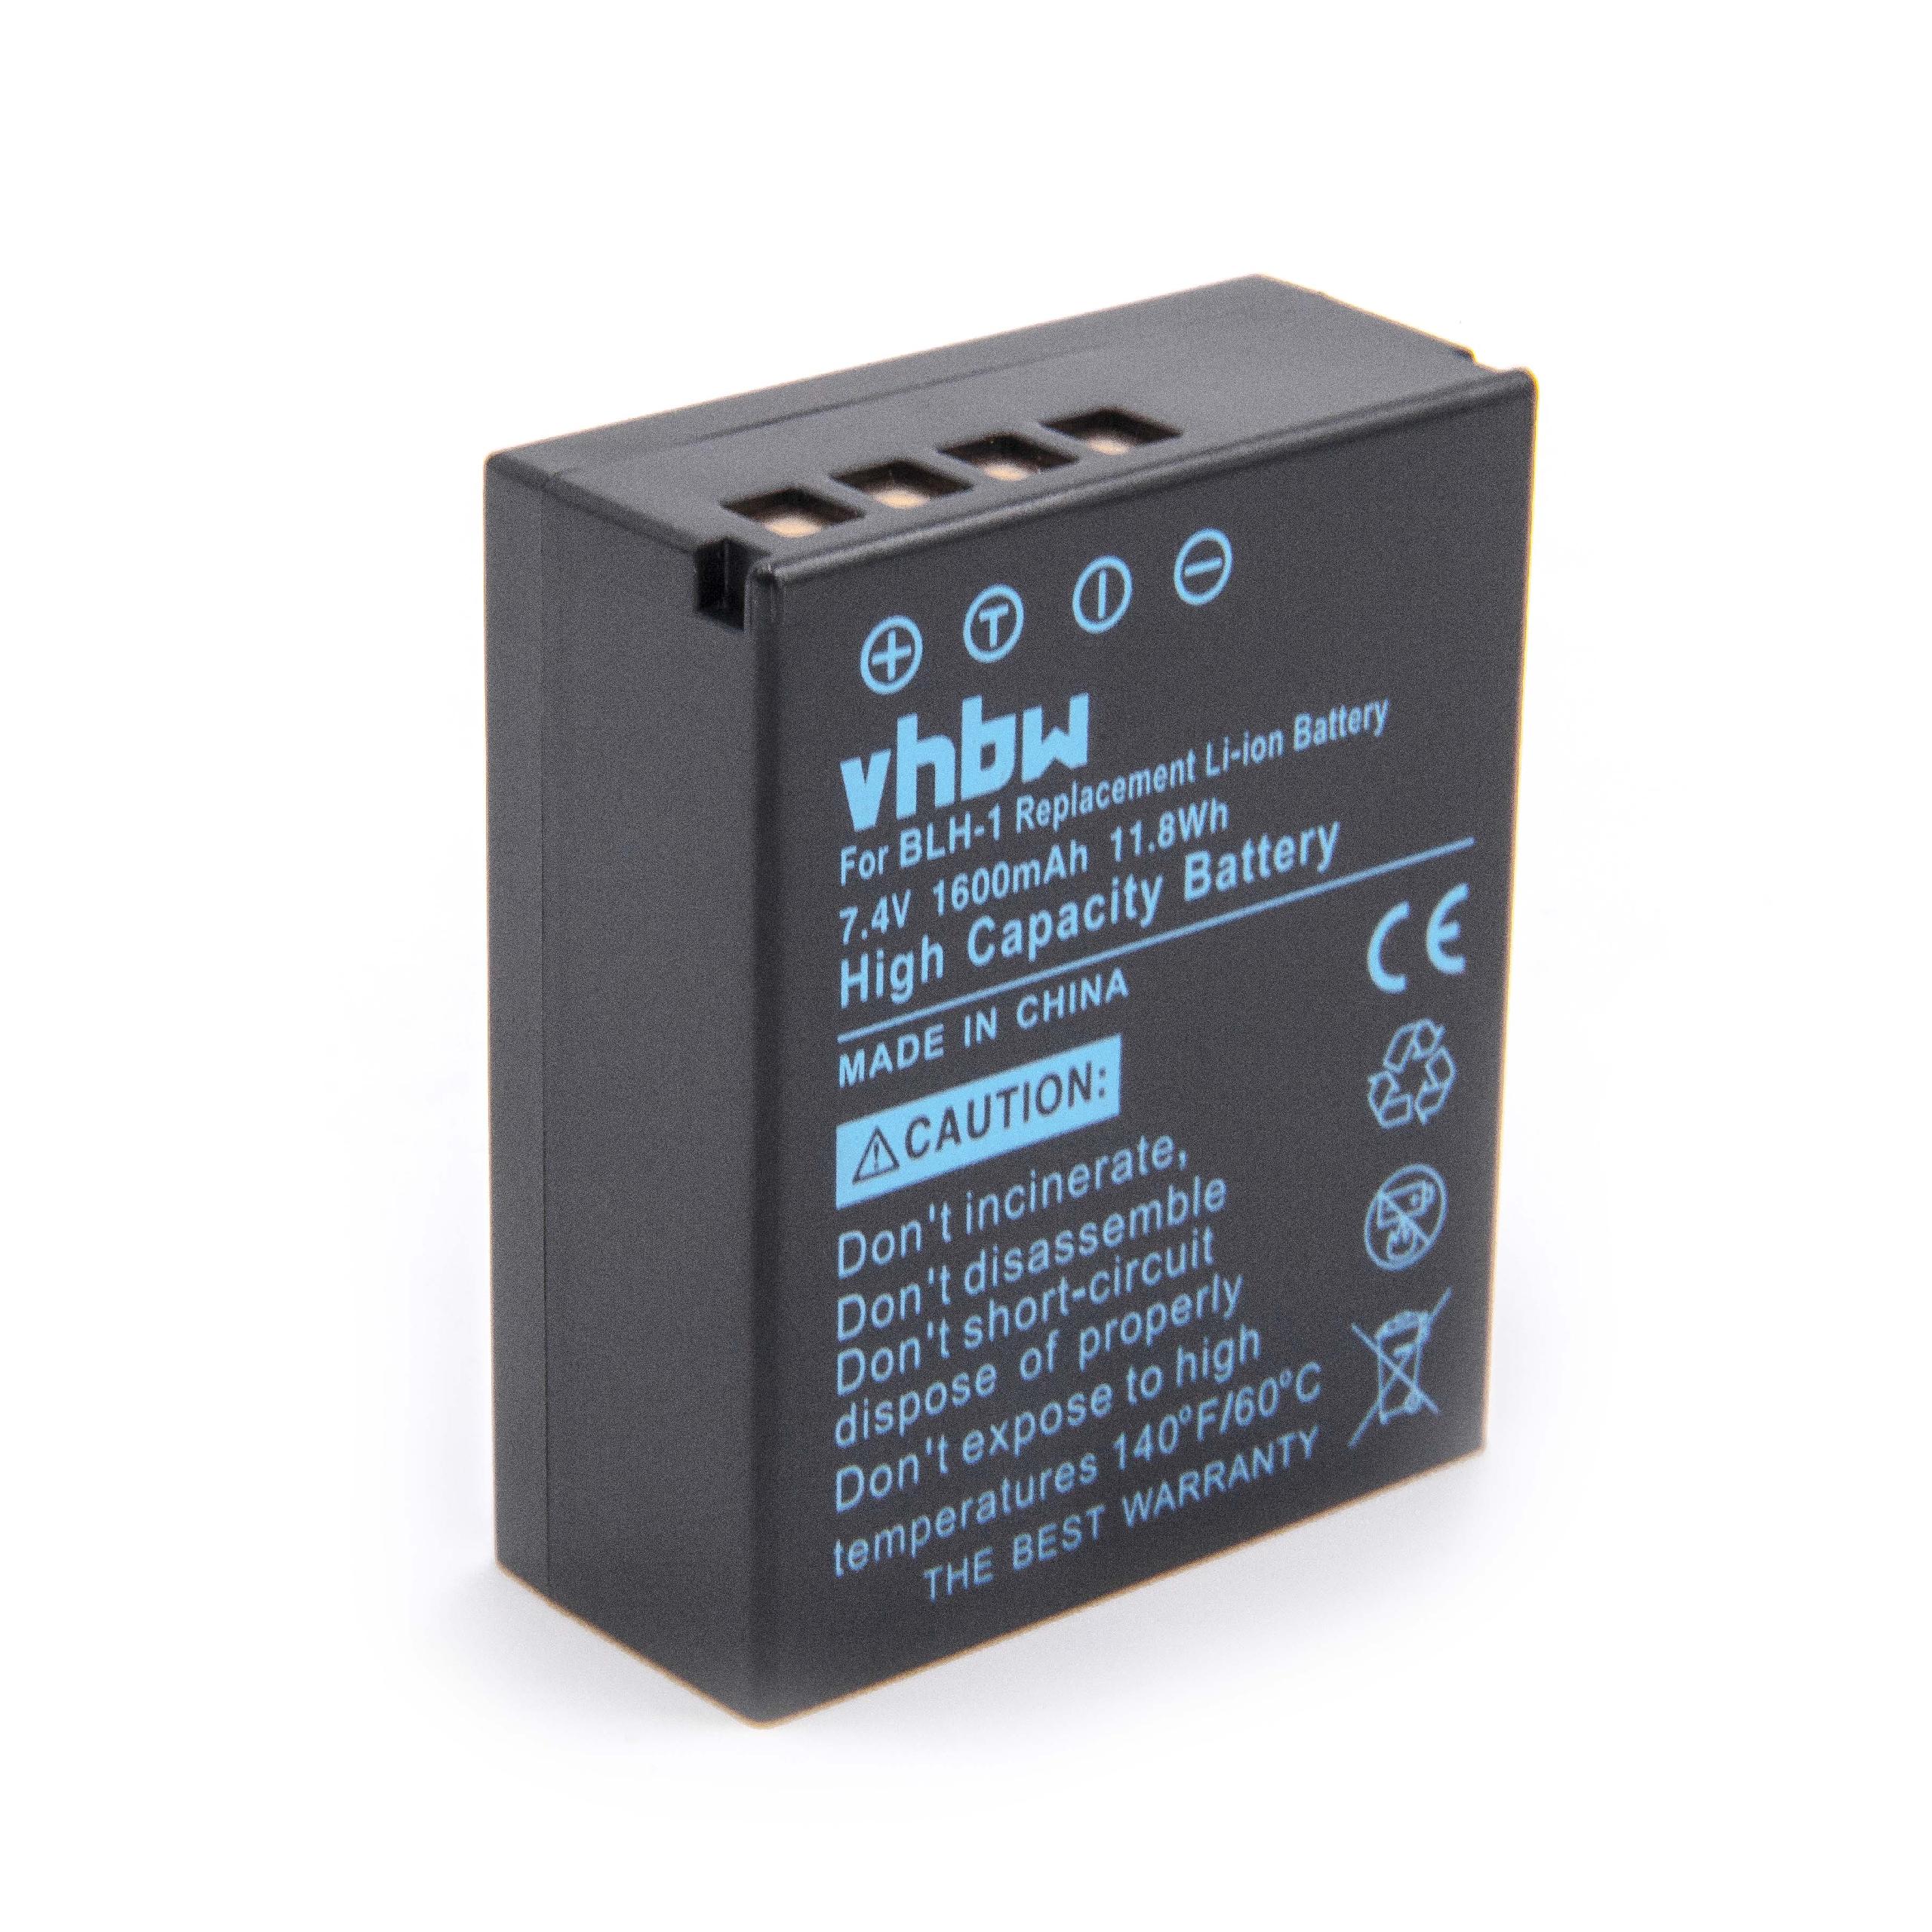 Battery Replacement for Olympus BLH-1 - 1600mAh, 7.4V, Li-Ion